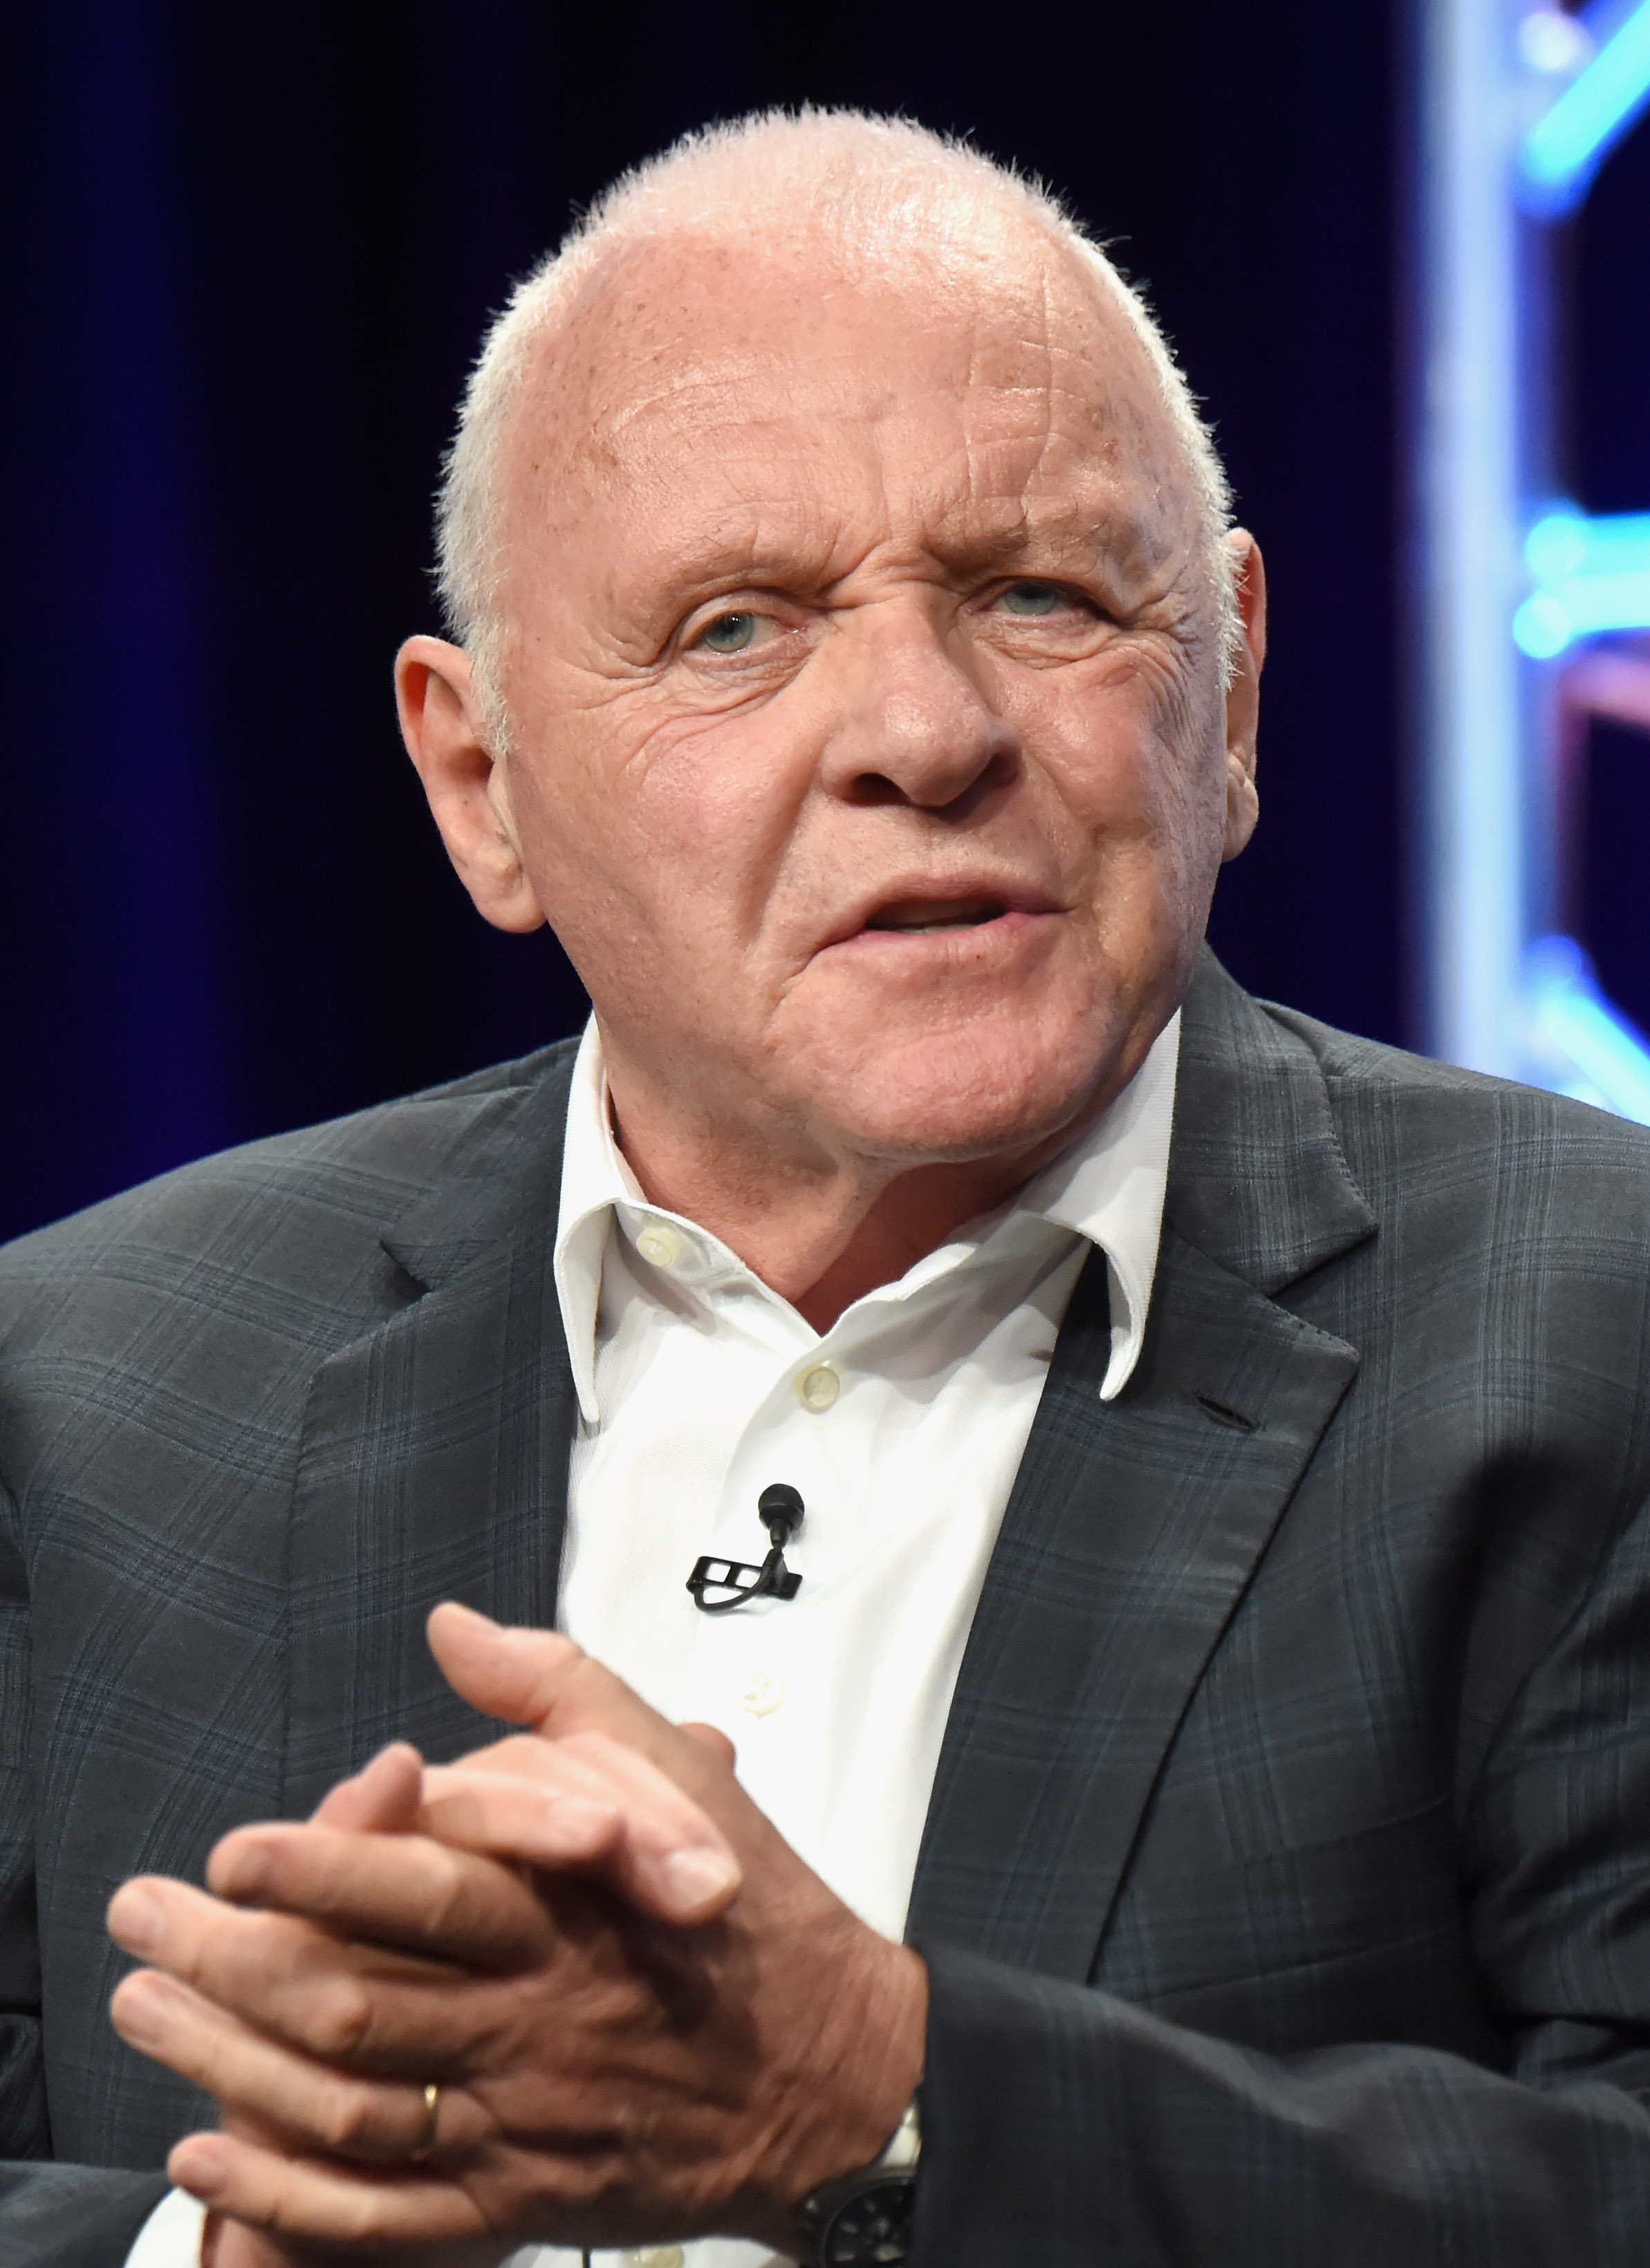 Anthony Hopkins takes the stage and addresses the audience during the "Westworld" panel discussion at the HBO segment of the 2016 Television Critics Association Summer Tour. | Source: Getty Images